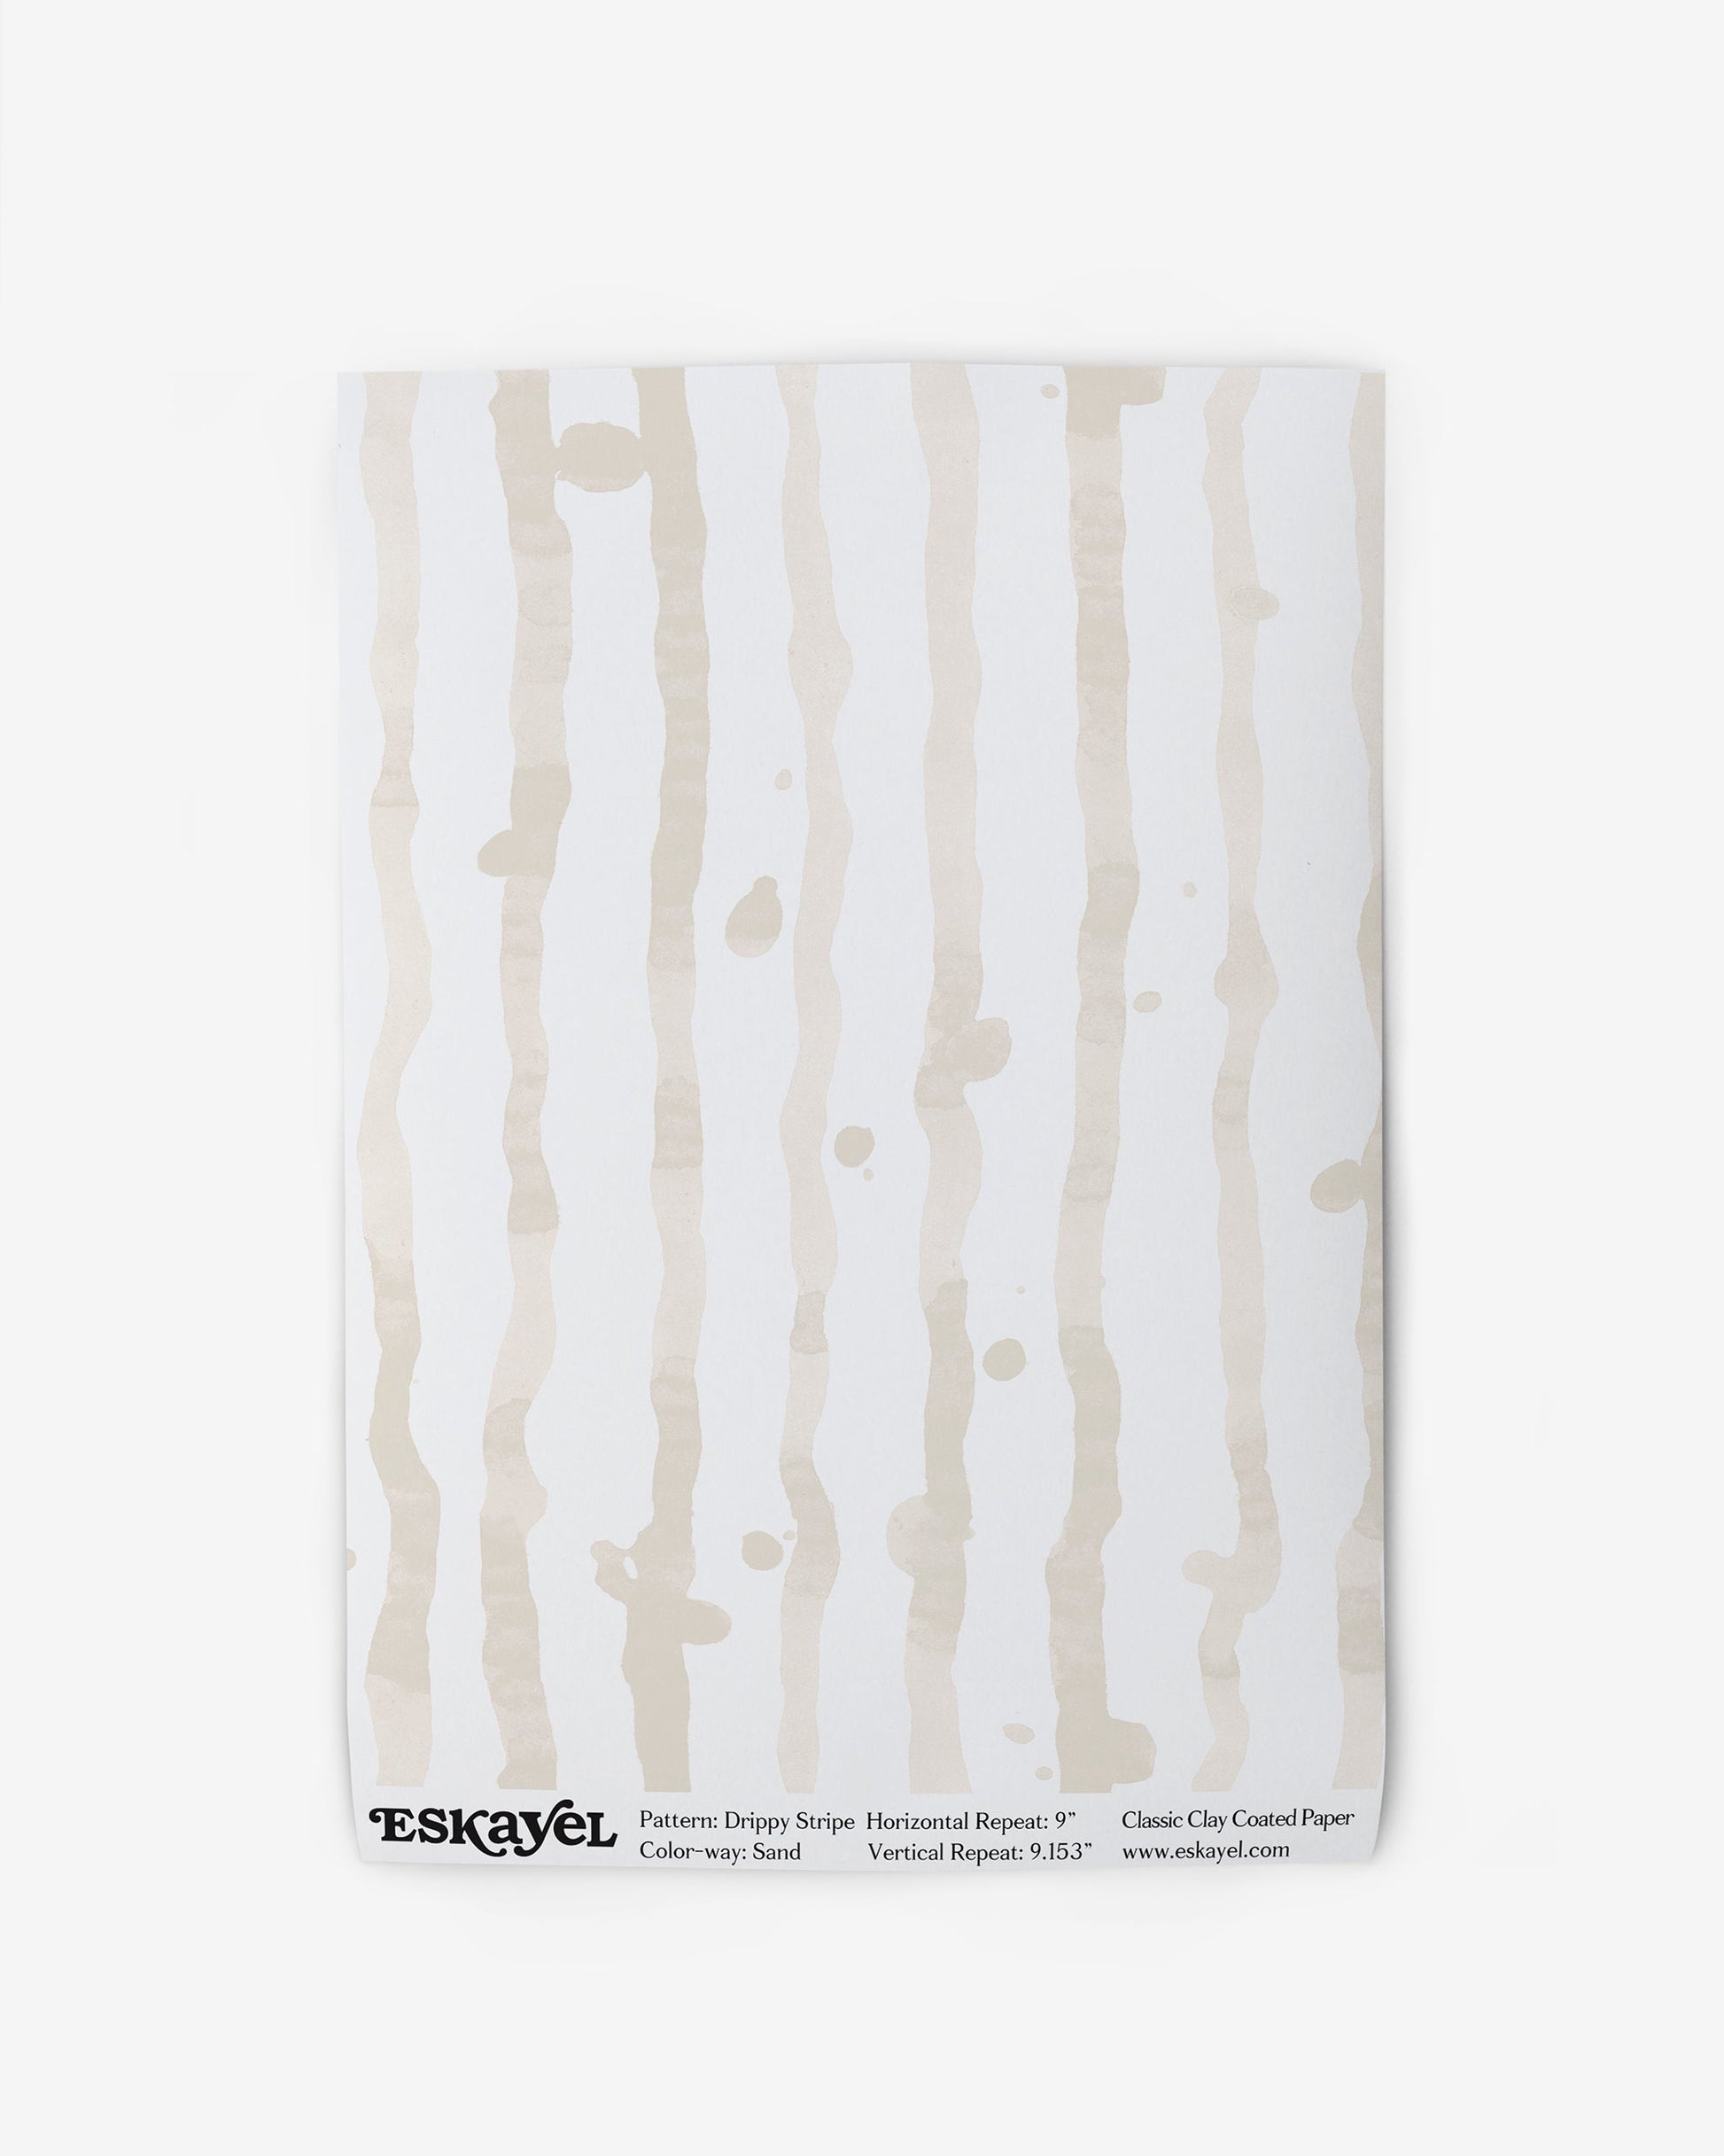 A product description for a Drippy Stripe Wallpaper Sample||Sand. You can also order a sample.